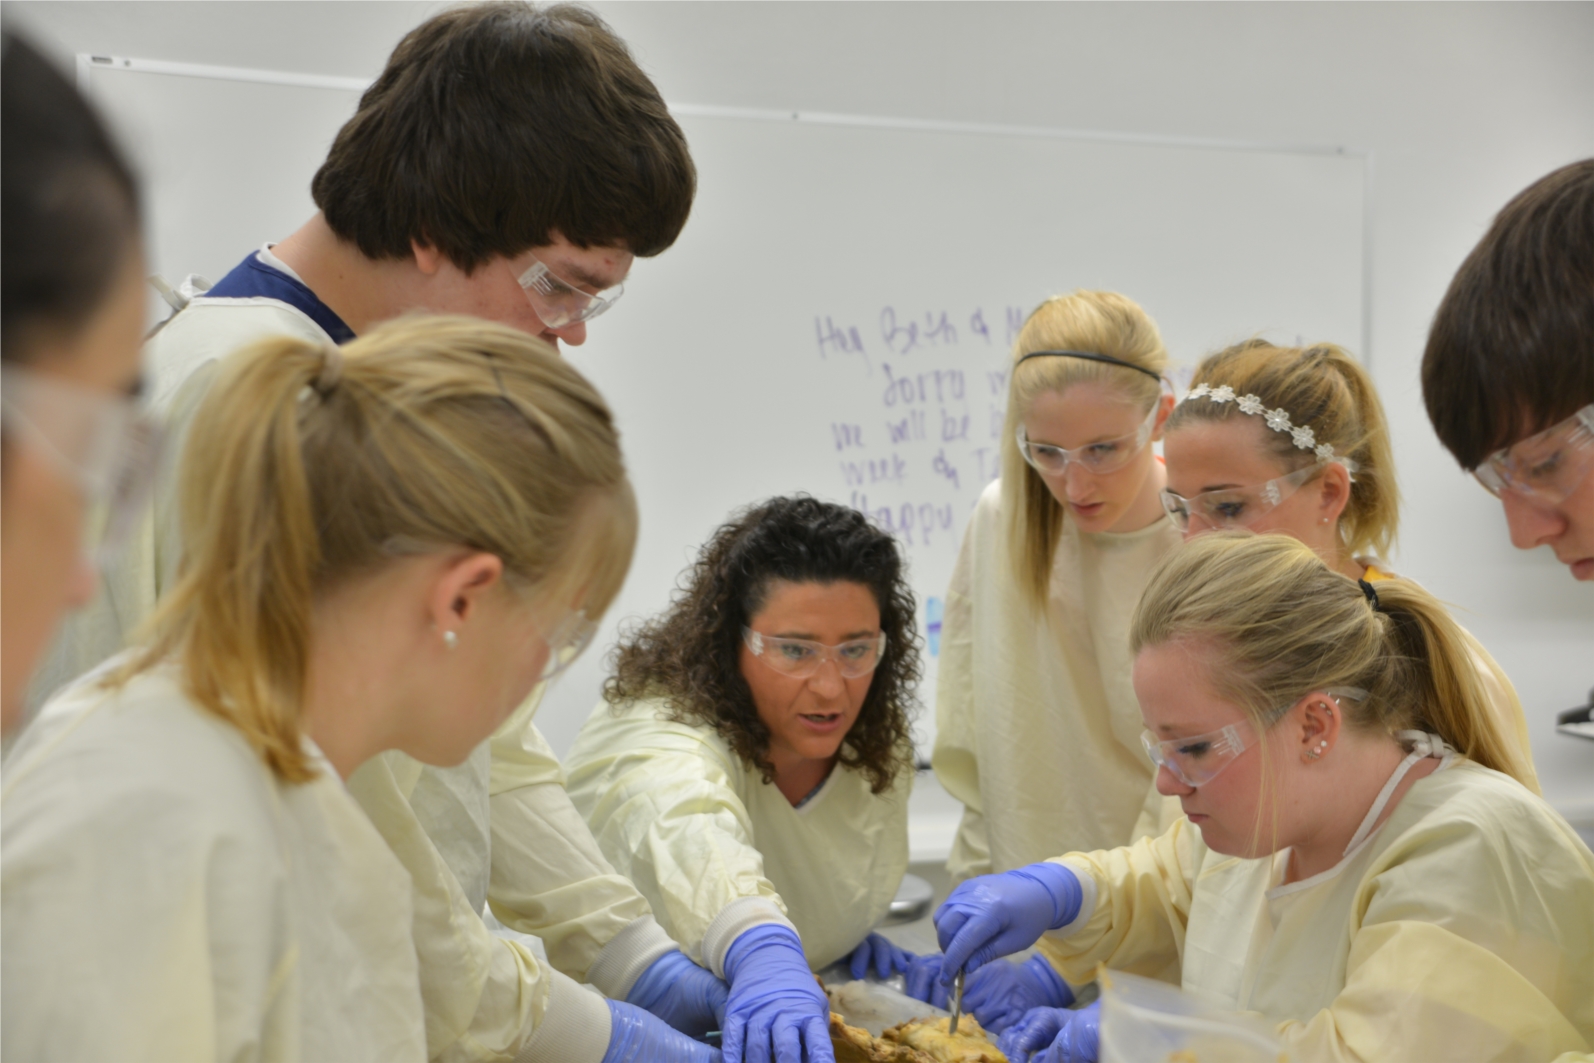 Whitmer teacher Bernadette Terry has formed a partnership with Dr. Baptista, Director of the University of Toledo Plastination Laboratory. Because of this partnership, Mrs. Terry and a small group of her students are invited to the UTMC Anatomy Institute for hands-on learning.